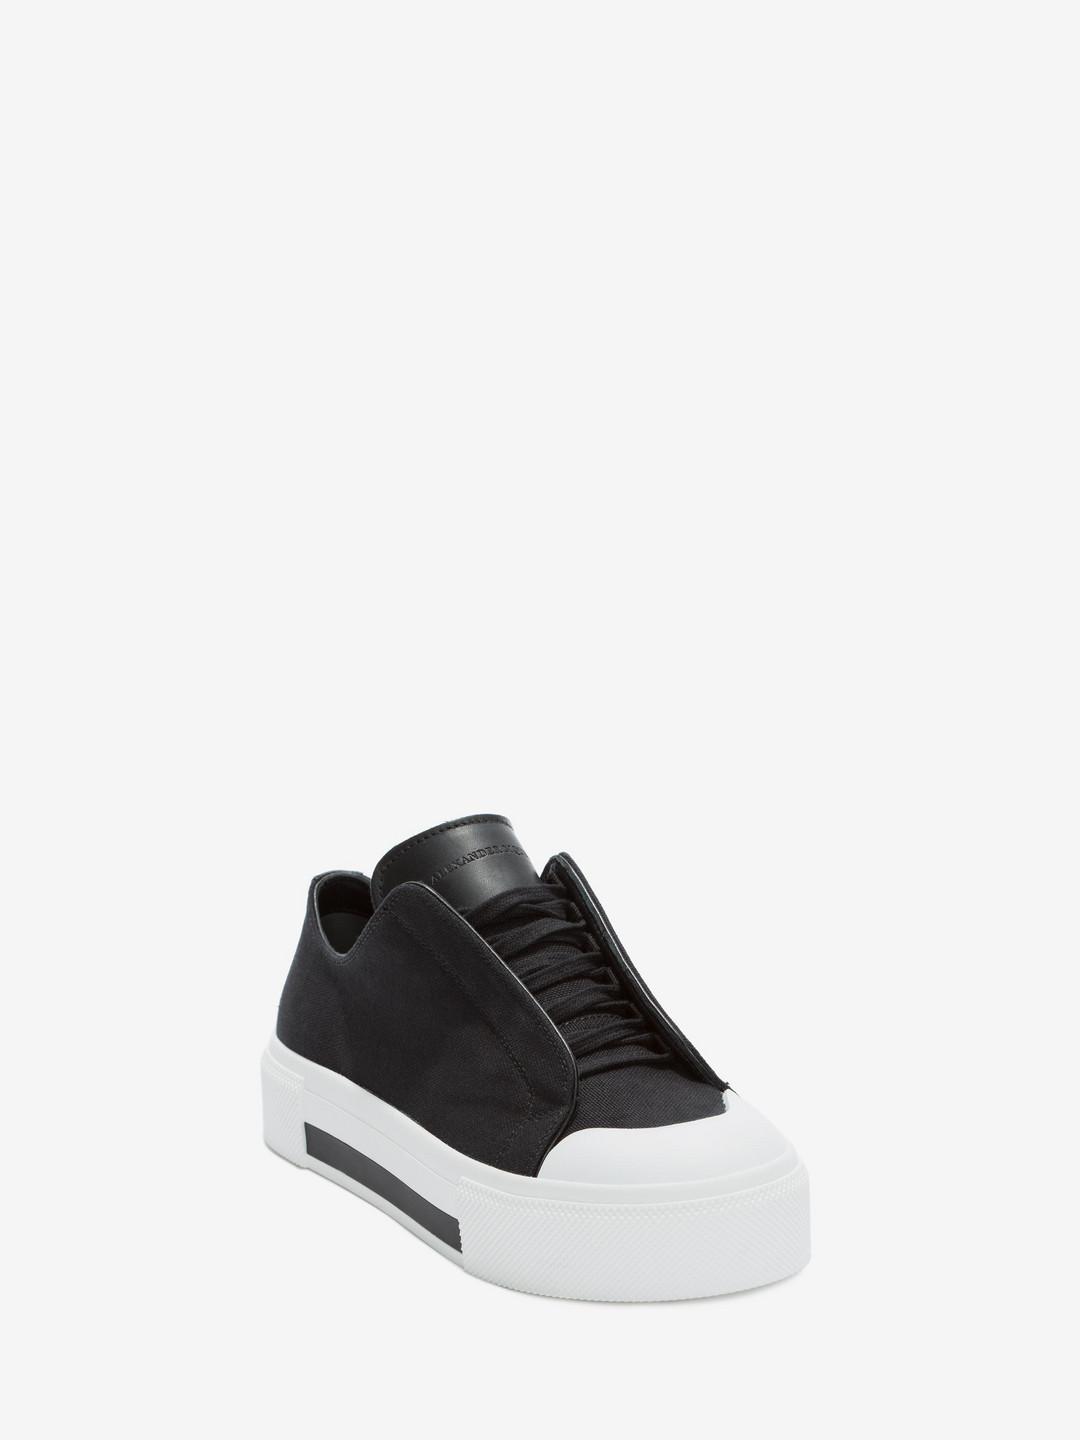 Low Cut Lace-up Sneakers in Black 